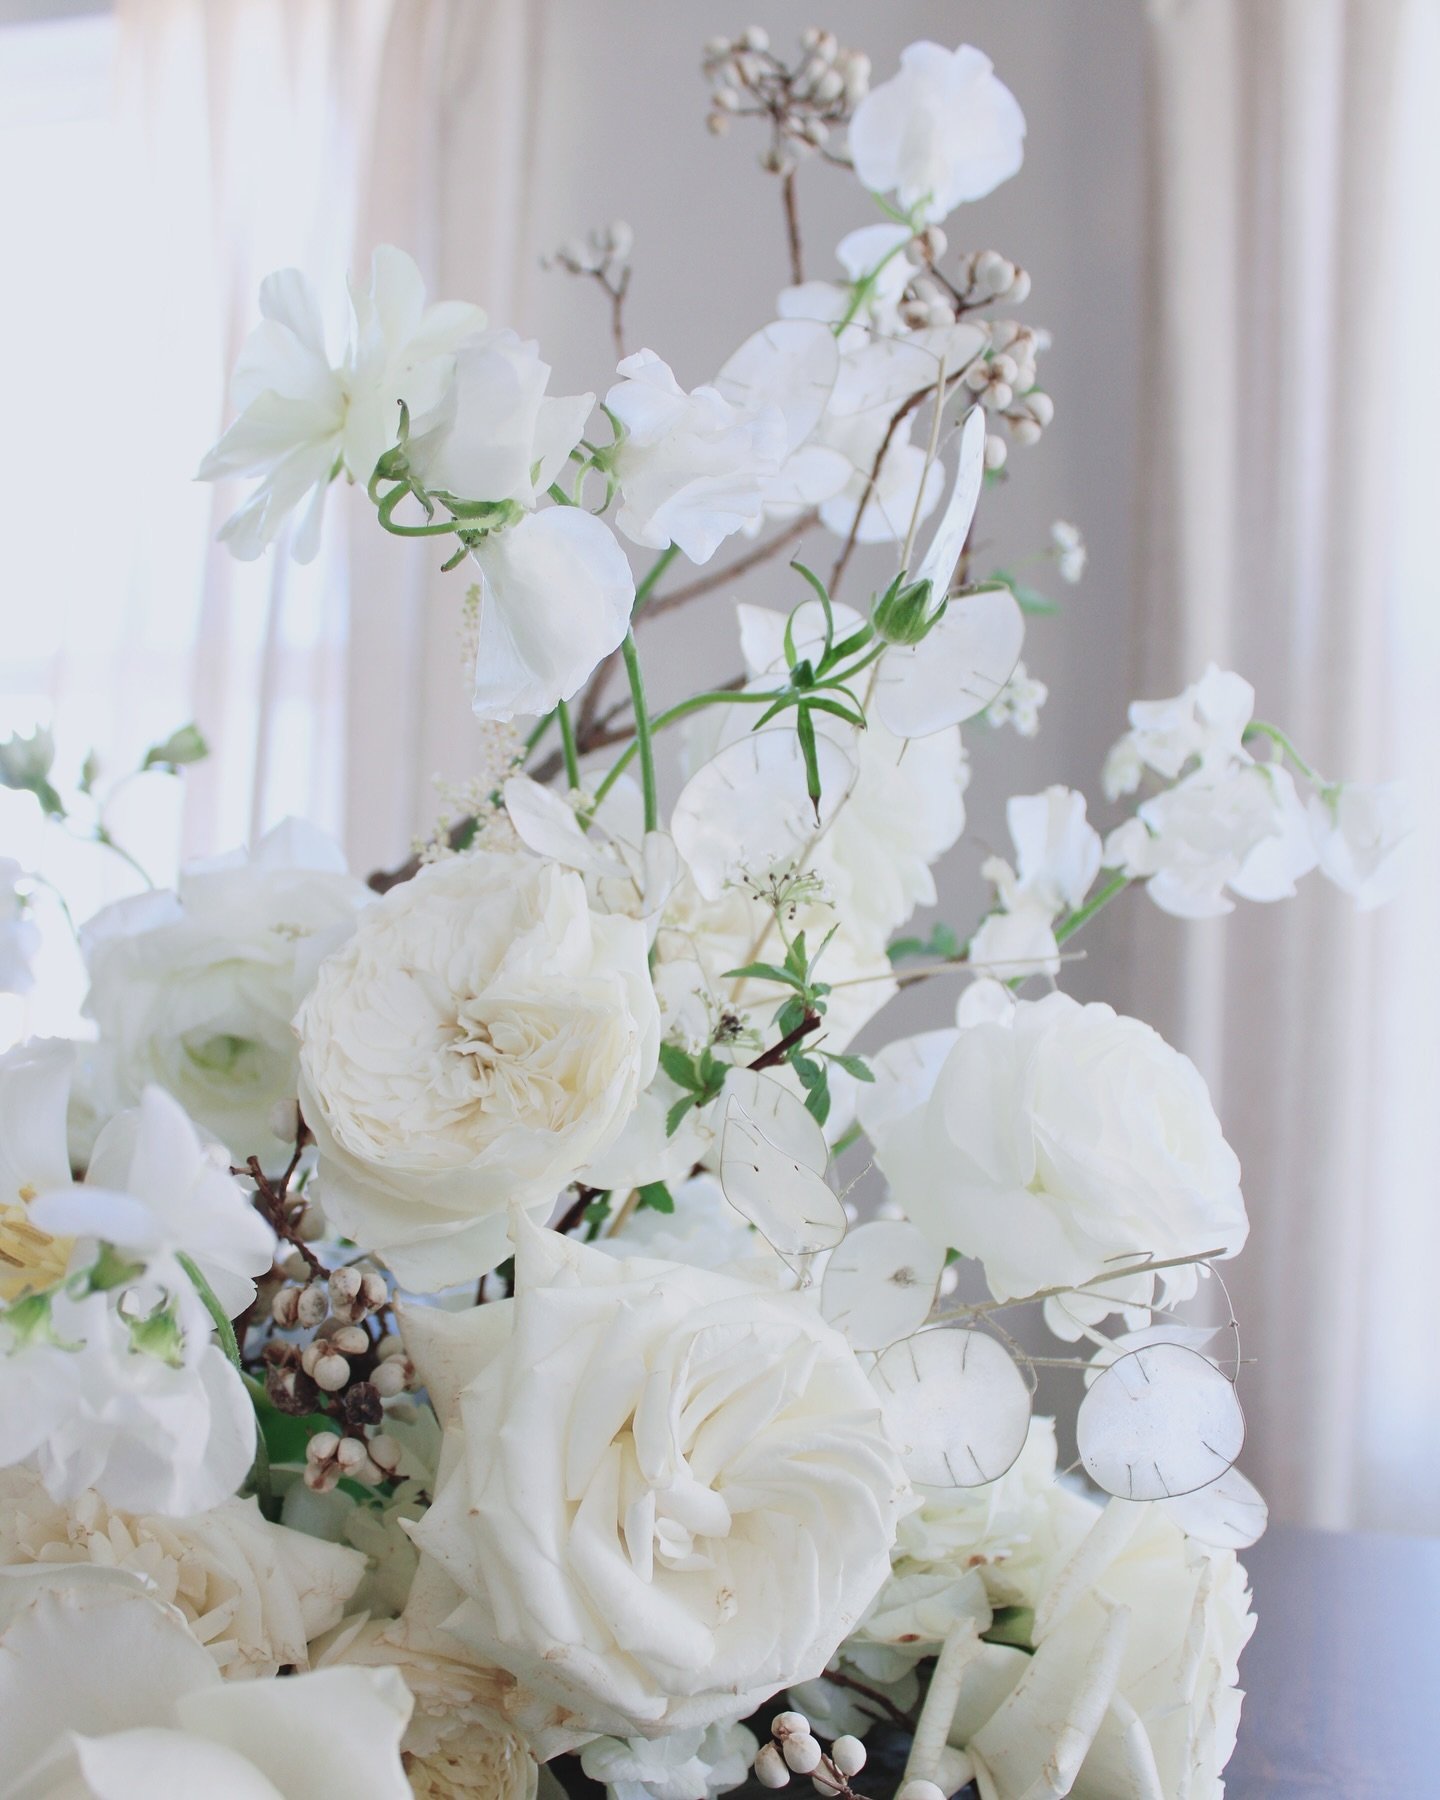 Timeless palettes can have a refresh by incorporating texture and elements that create interest
.
.
.
.
.
#floral #floraldesign #wedding #weddingflowers #bridal #floralart #pawedding #wvwedding #florist #floristry #floristlife #smp #burghbrides #wedd